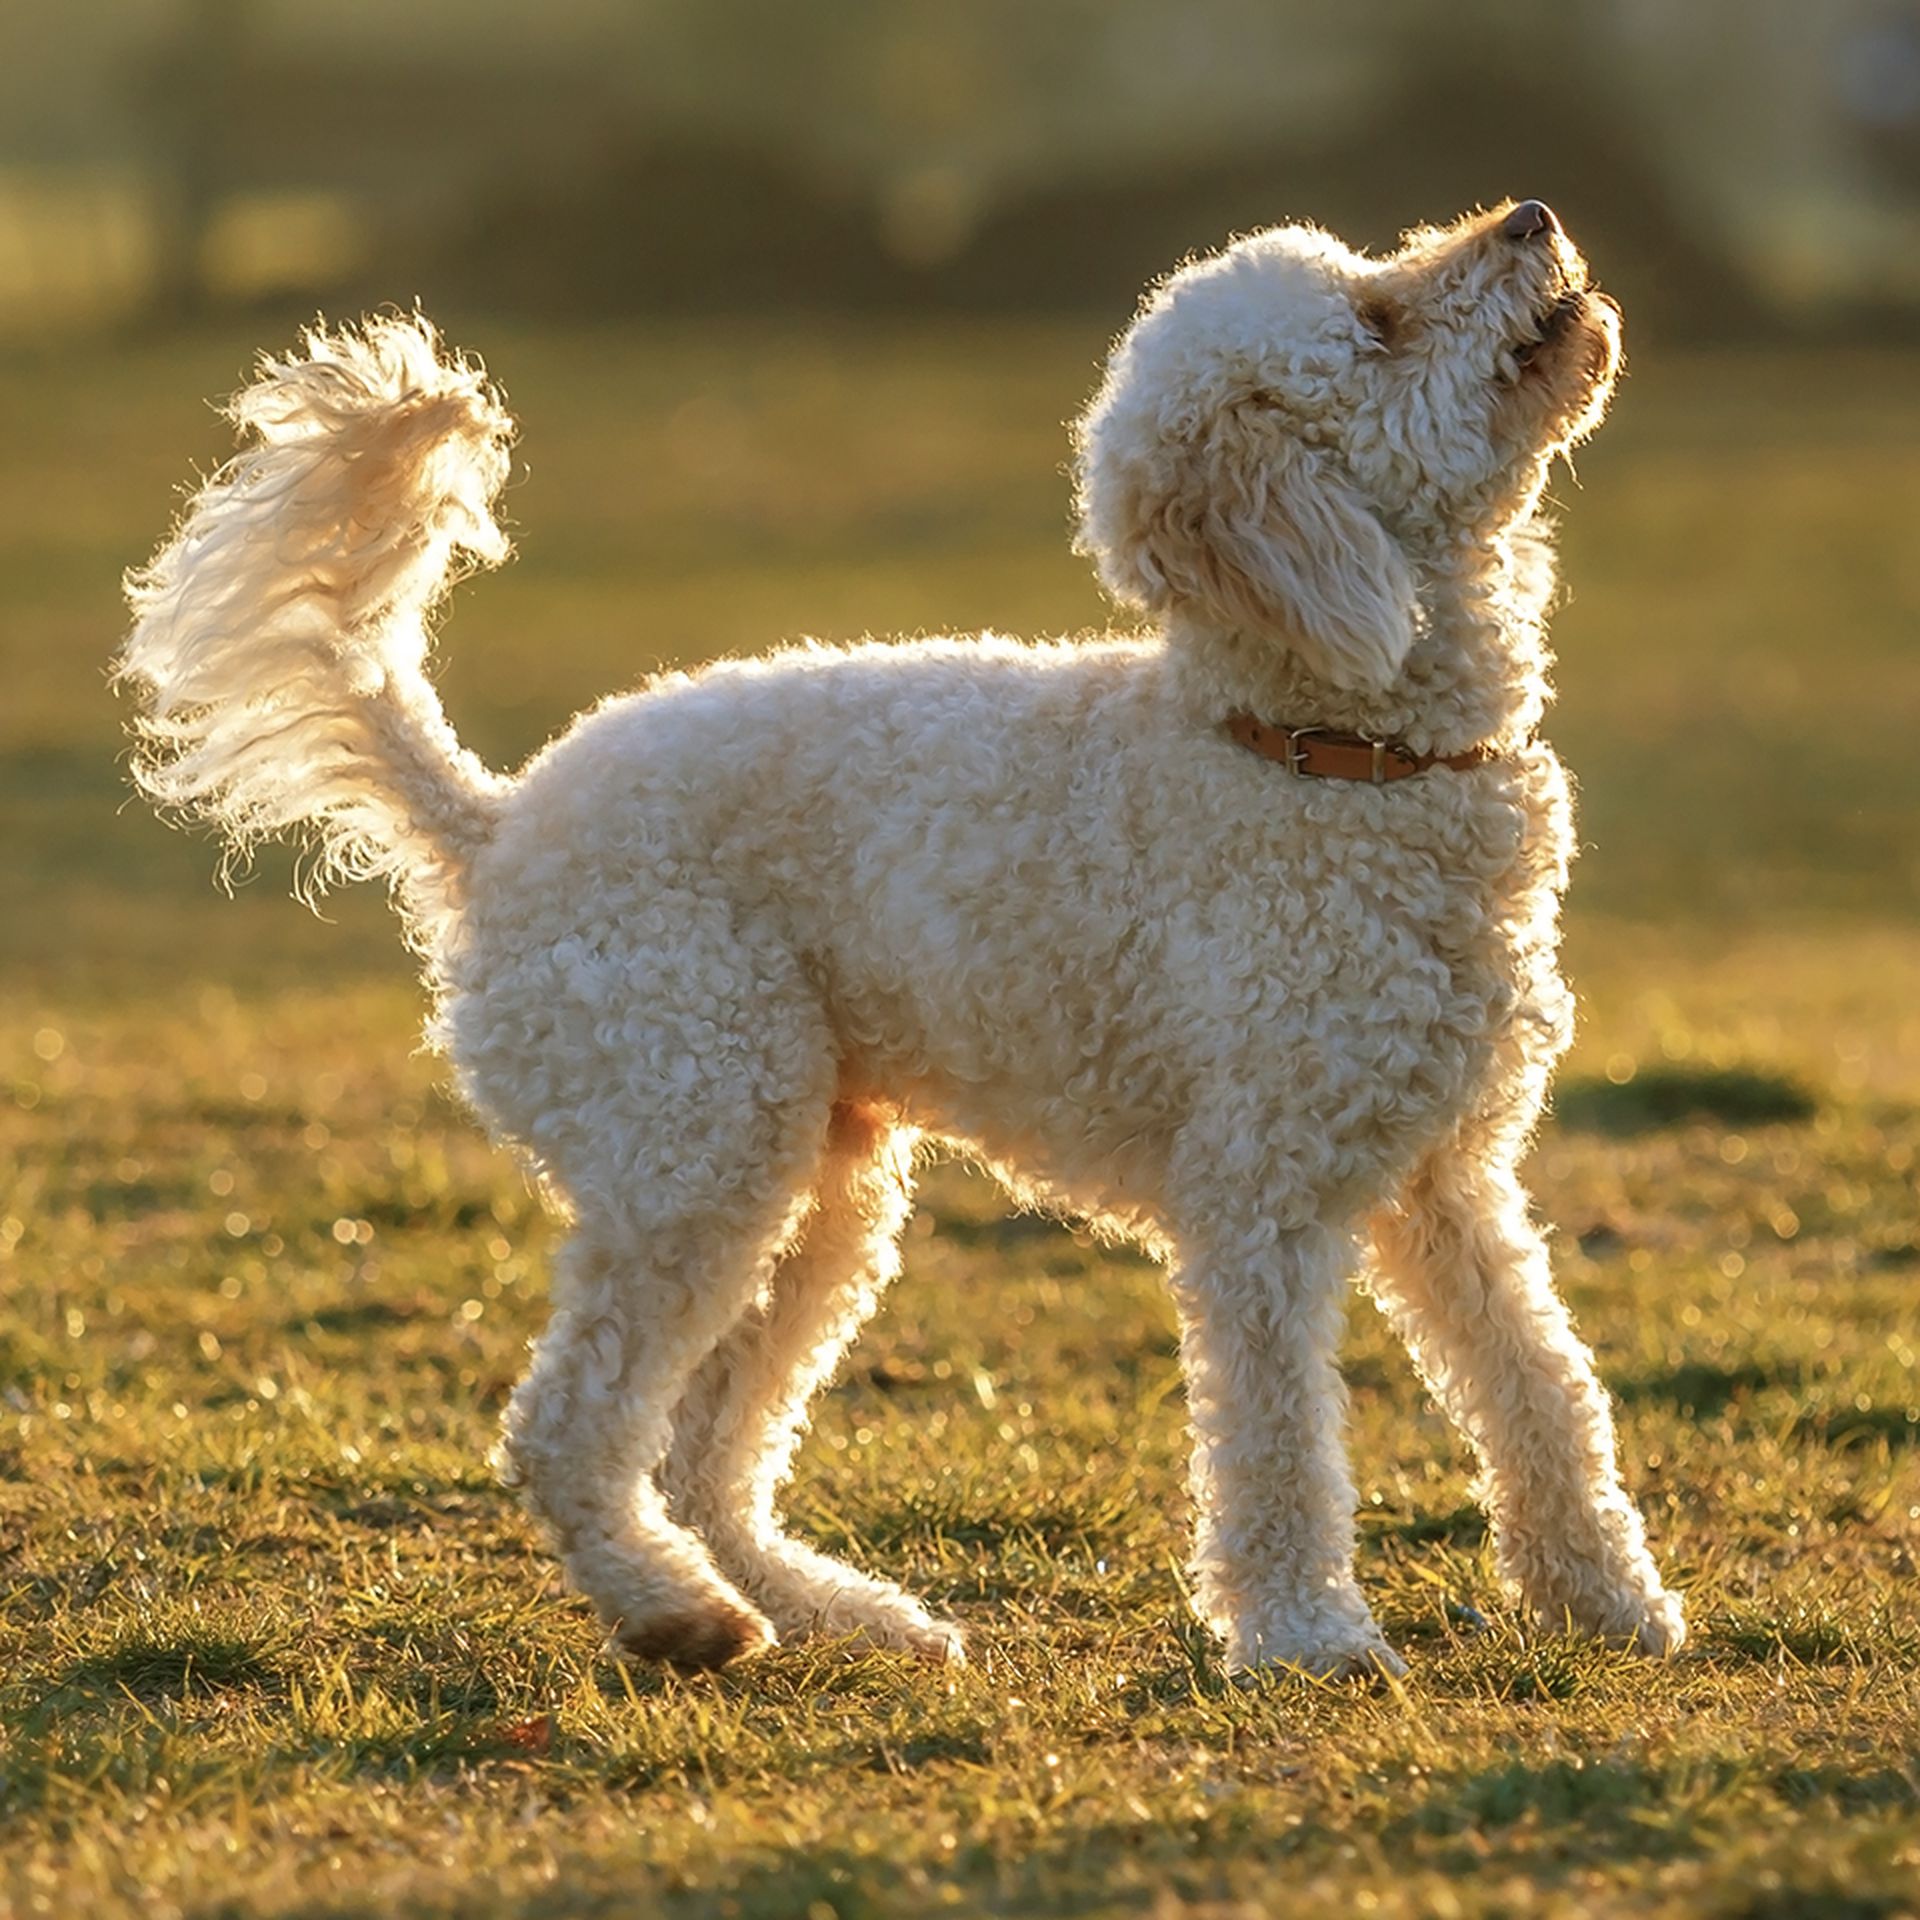 An excited goldendoodle looking up while standing in a grassy field.